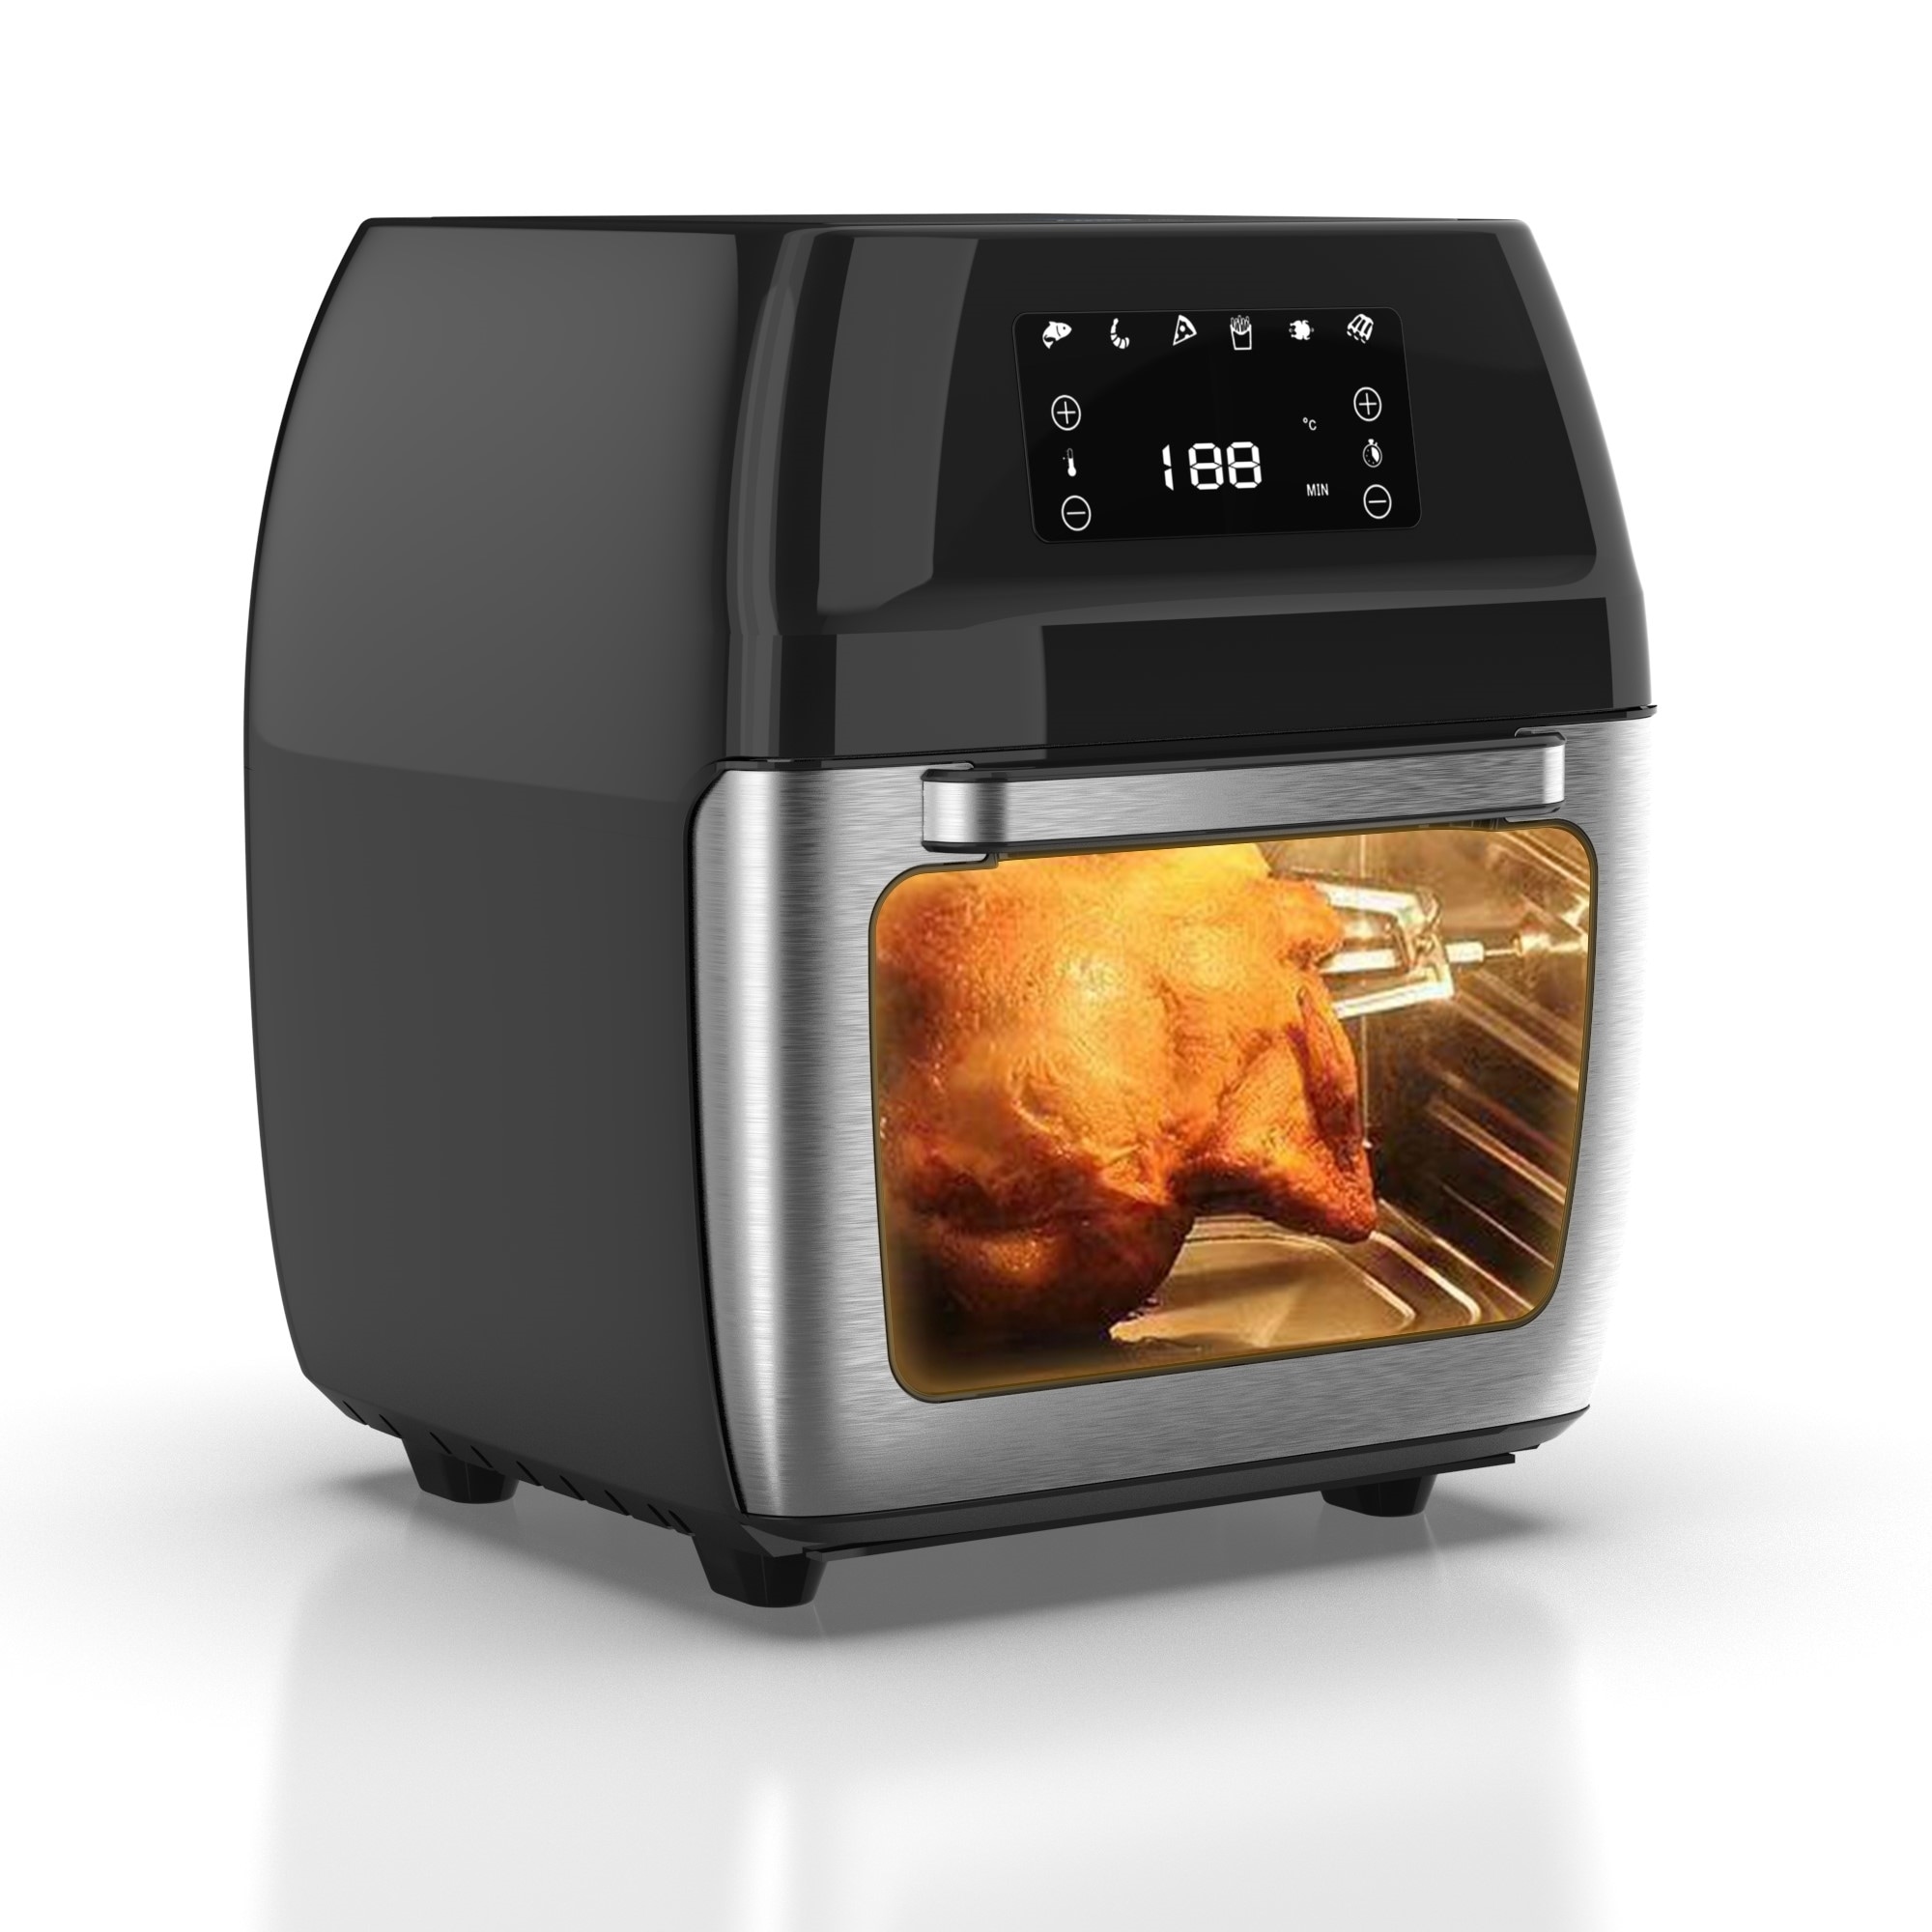 Chefpod Pro Air Fryer Touchscreen 13 QT Family Rotisserie Hot Oven Cooker - On Sale - Overstock - 34182812